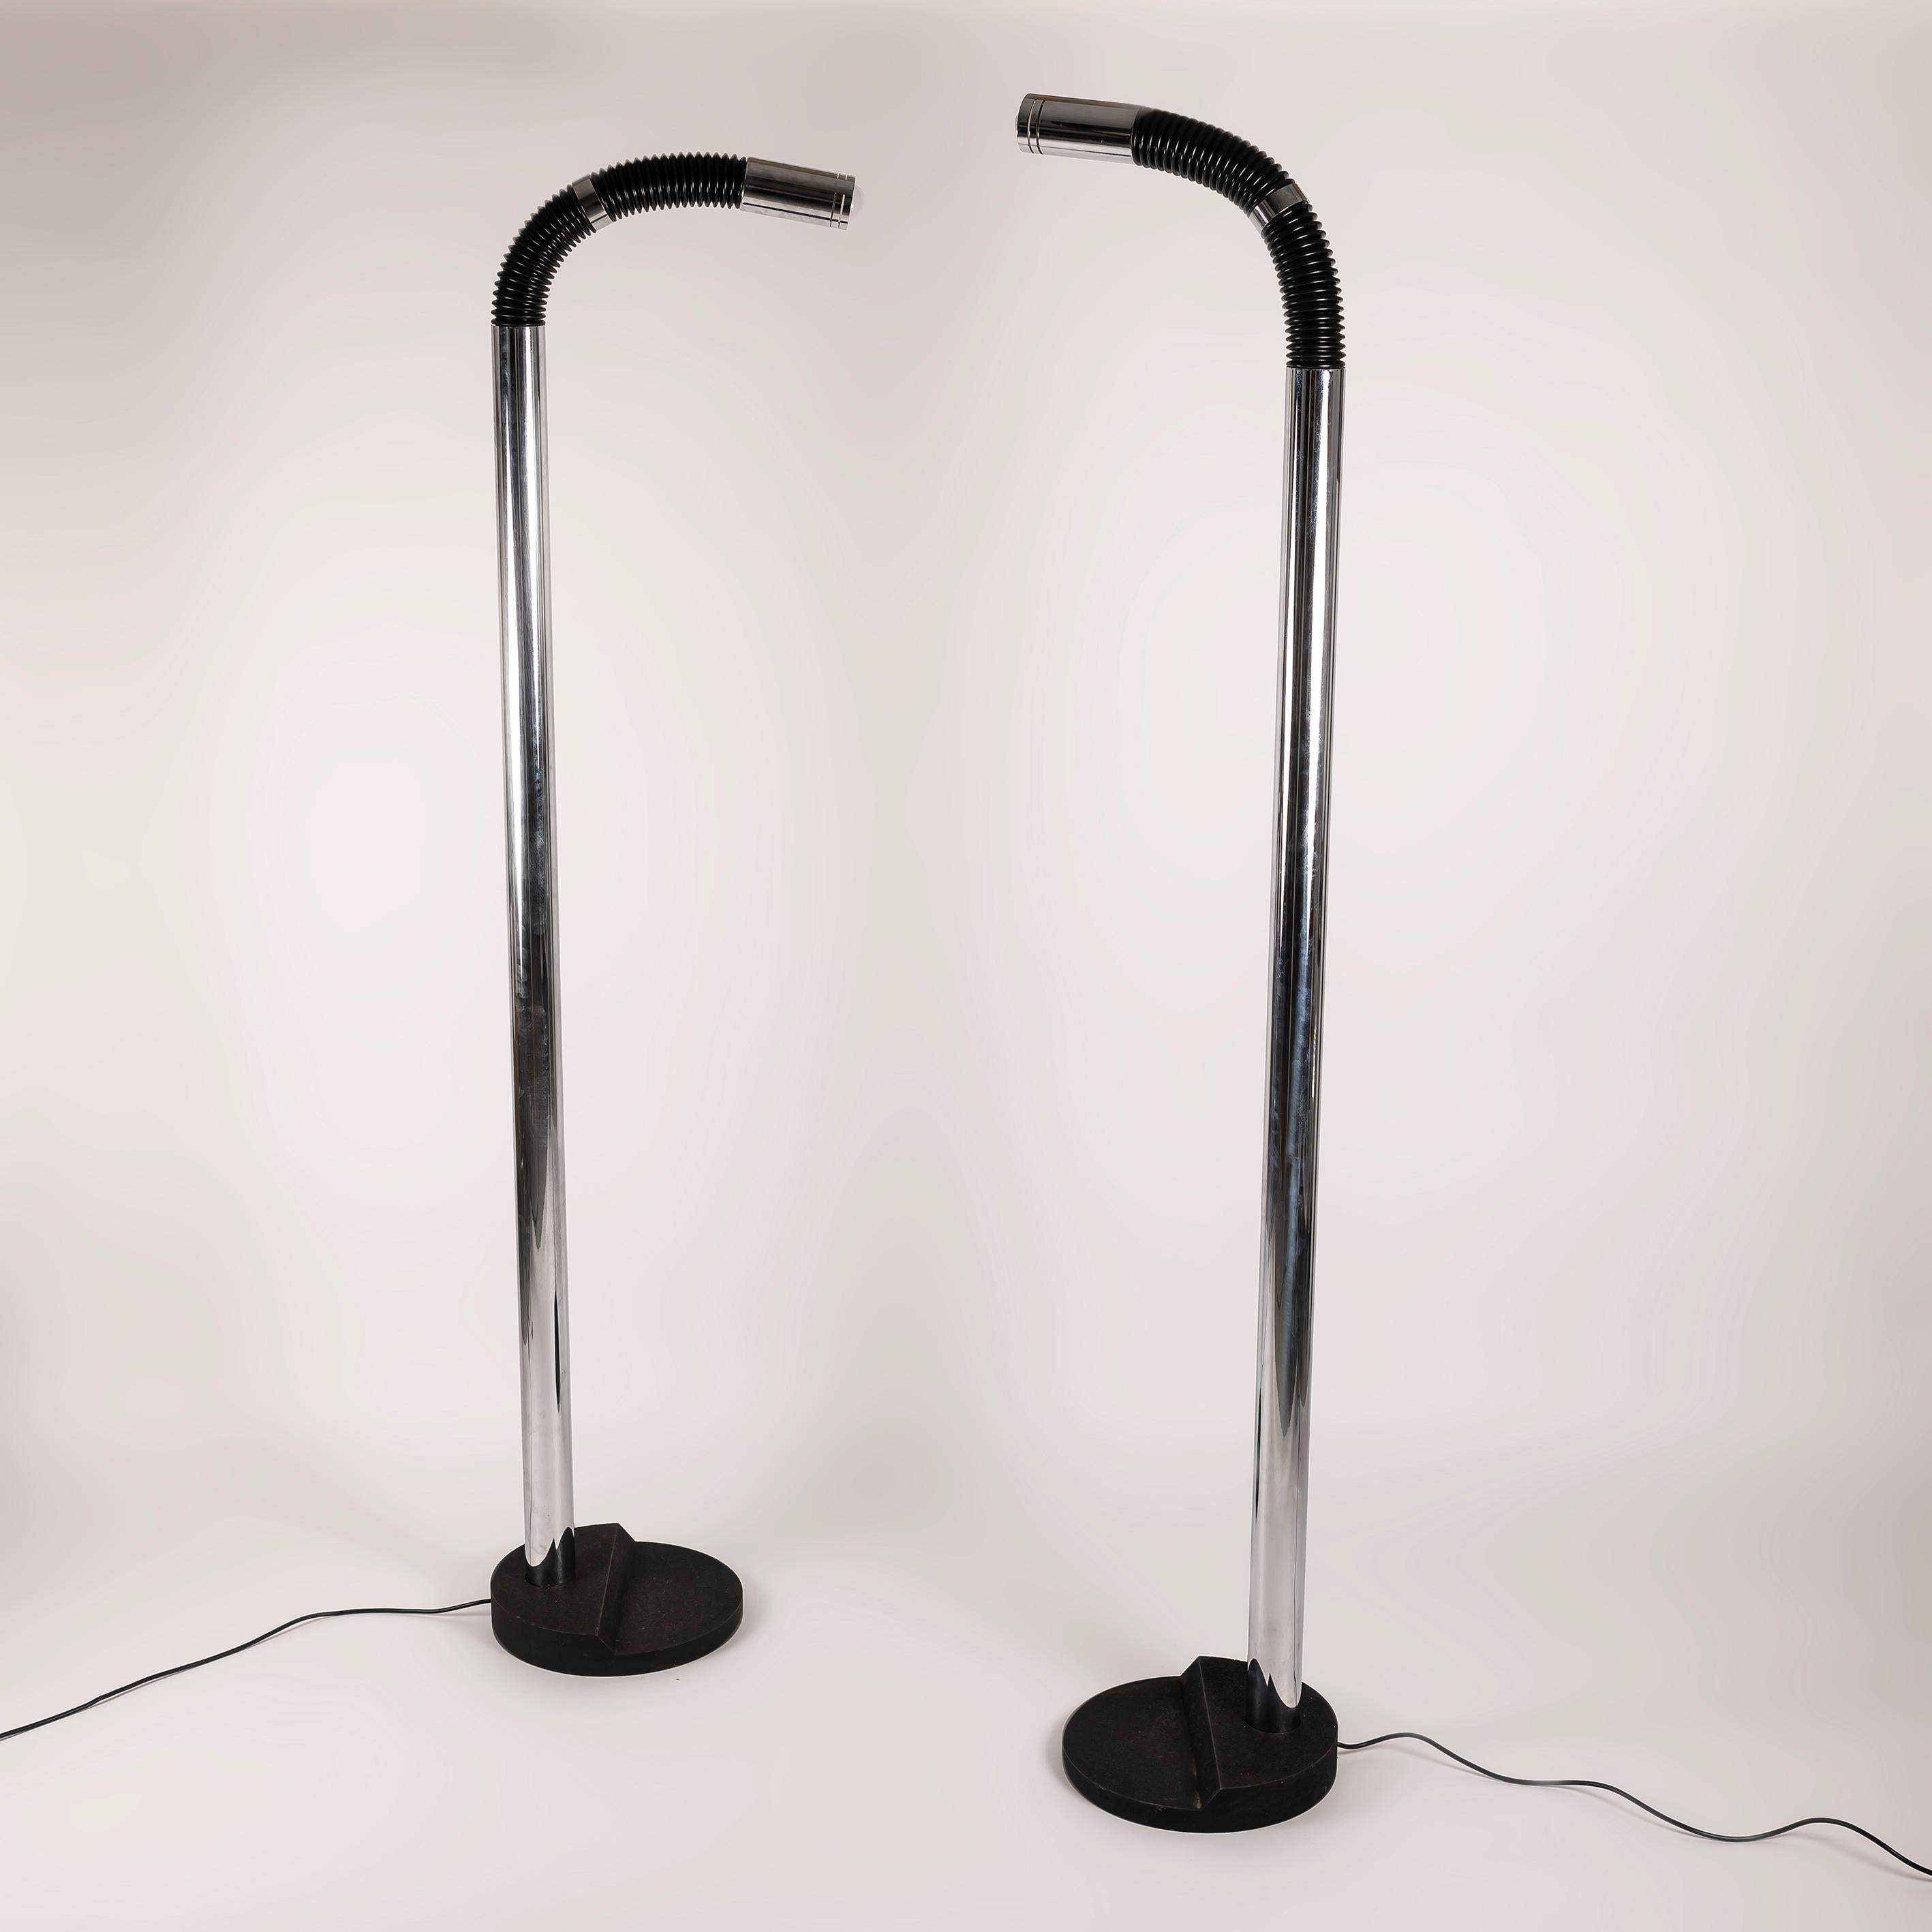 Space Age Italian Floor Lamps in Lacquered Iron and Chromed Metal, 1970s For Sale 5